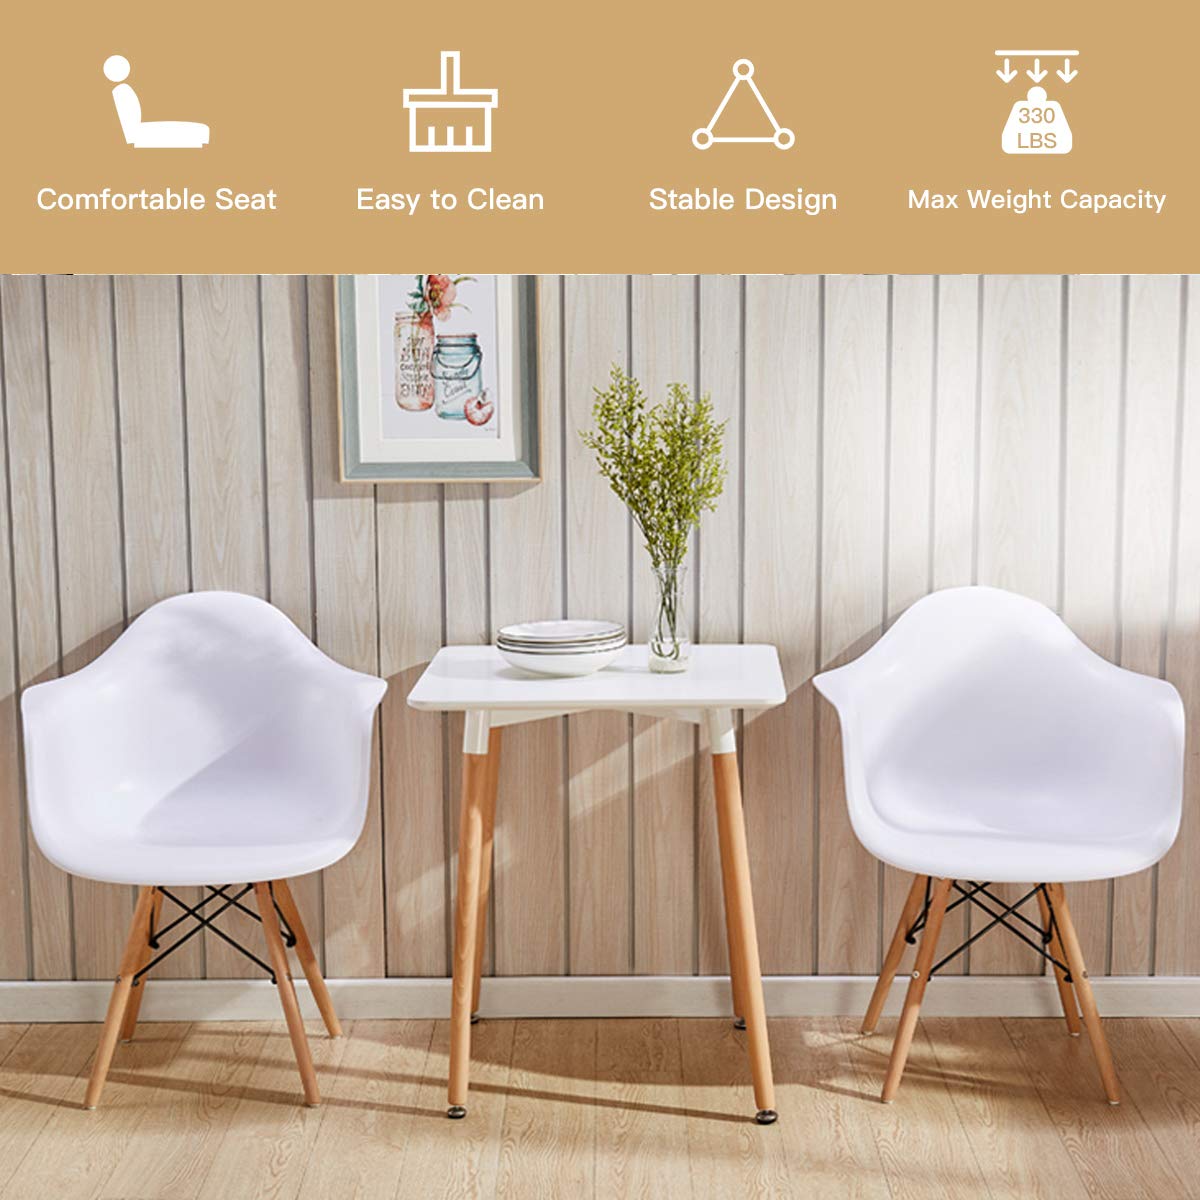 Safstar Mid Century Modern Dinning Chair Set of 2, 2 Pieces DSW Side Chair w/Beech Wood Legs & Curved Seat Supports, Accent Plastic Shell Chair Set for Kitchen, Dining, Bedroom, Living Room (2, White)